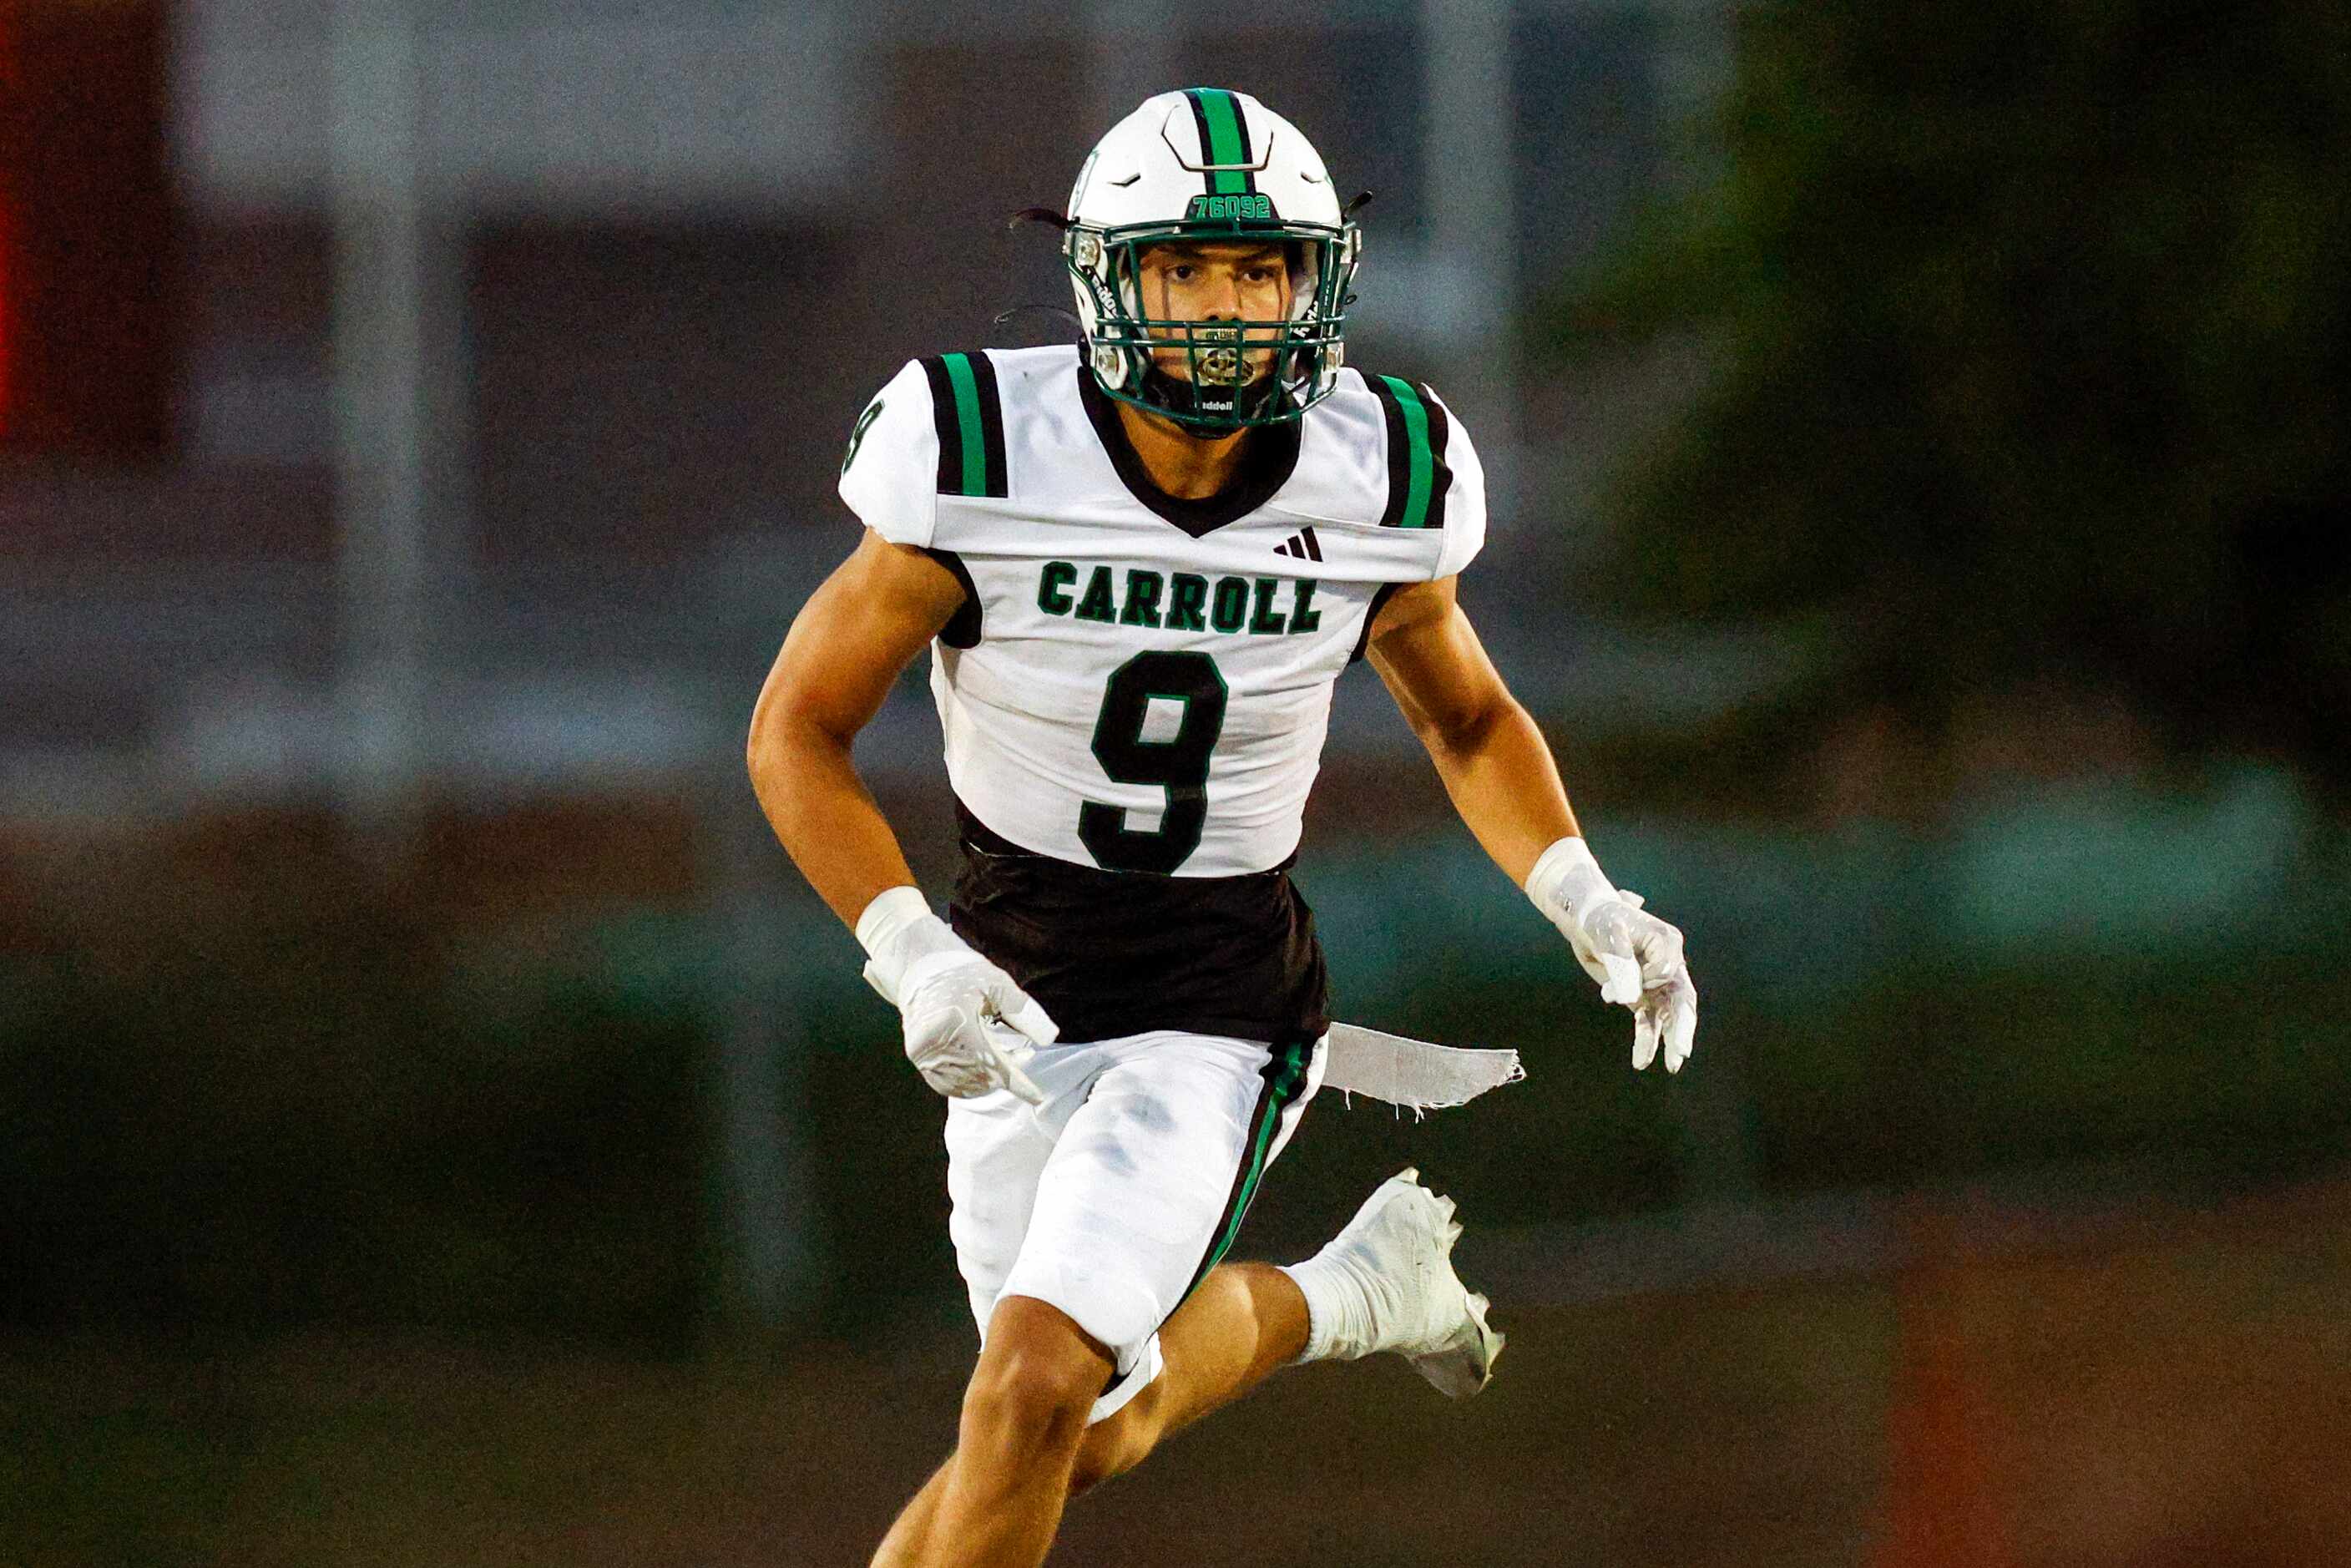 Southlake Carroll running back Riley Wormley (9) runs a route during the first half of a...